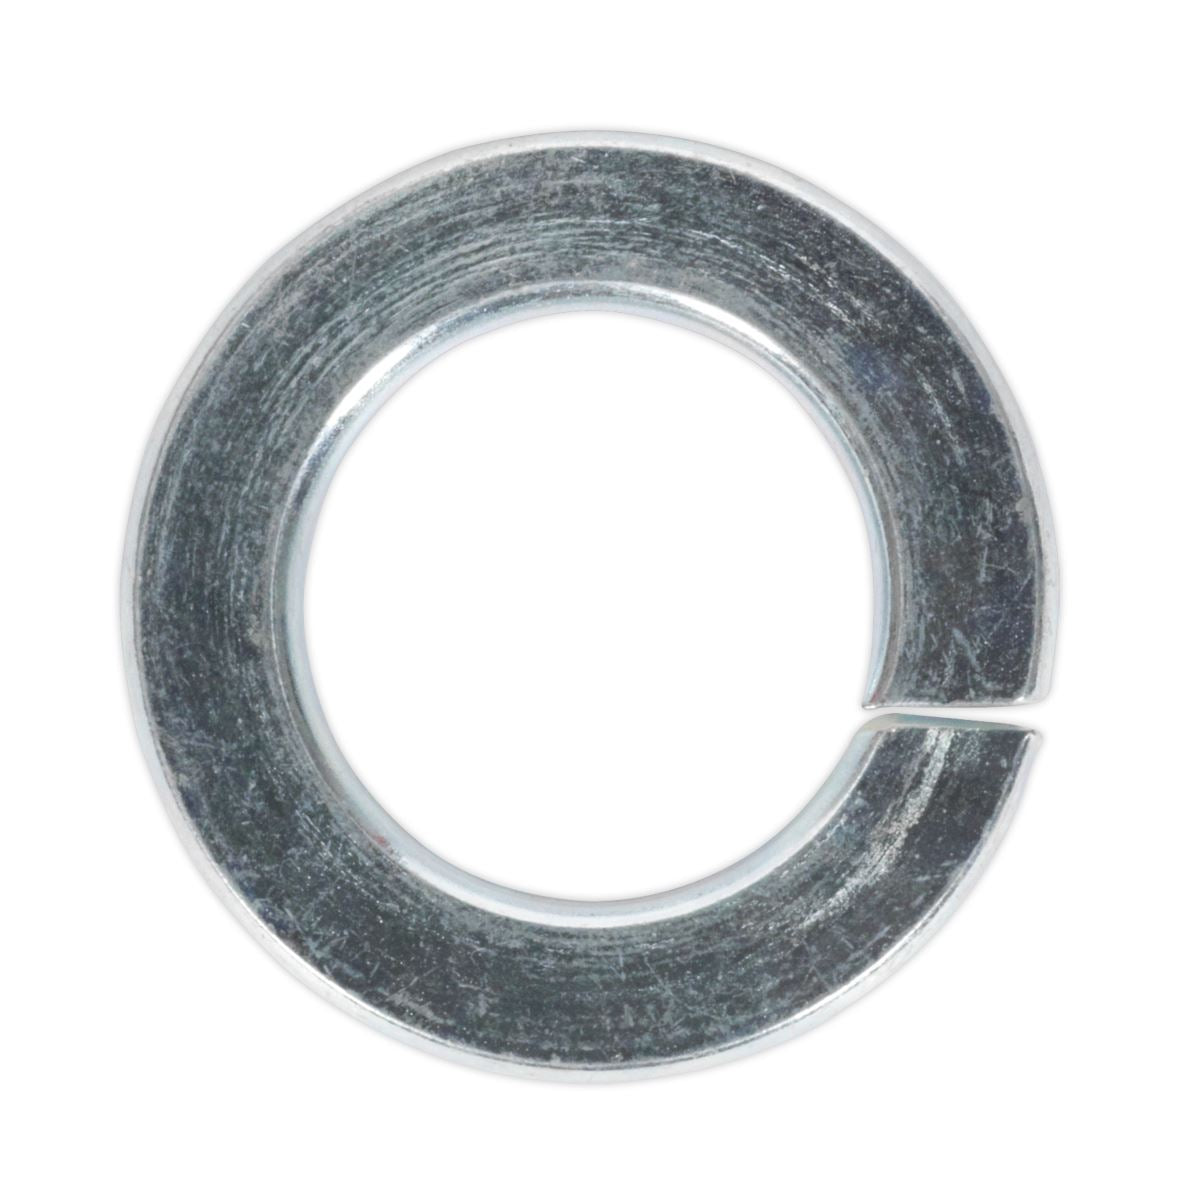 Sealey Spring Washer DIN 127B M14 Zinc Pack of 50